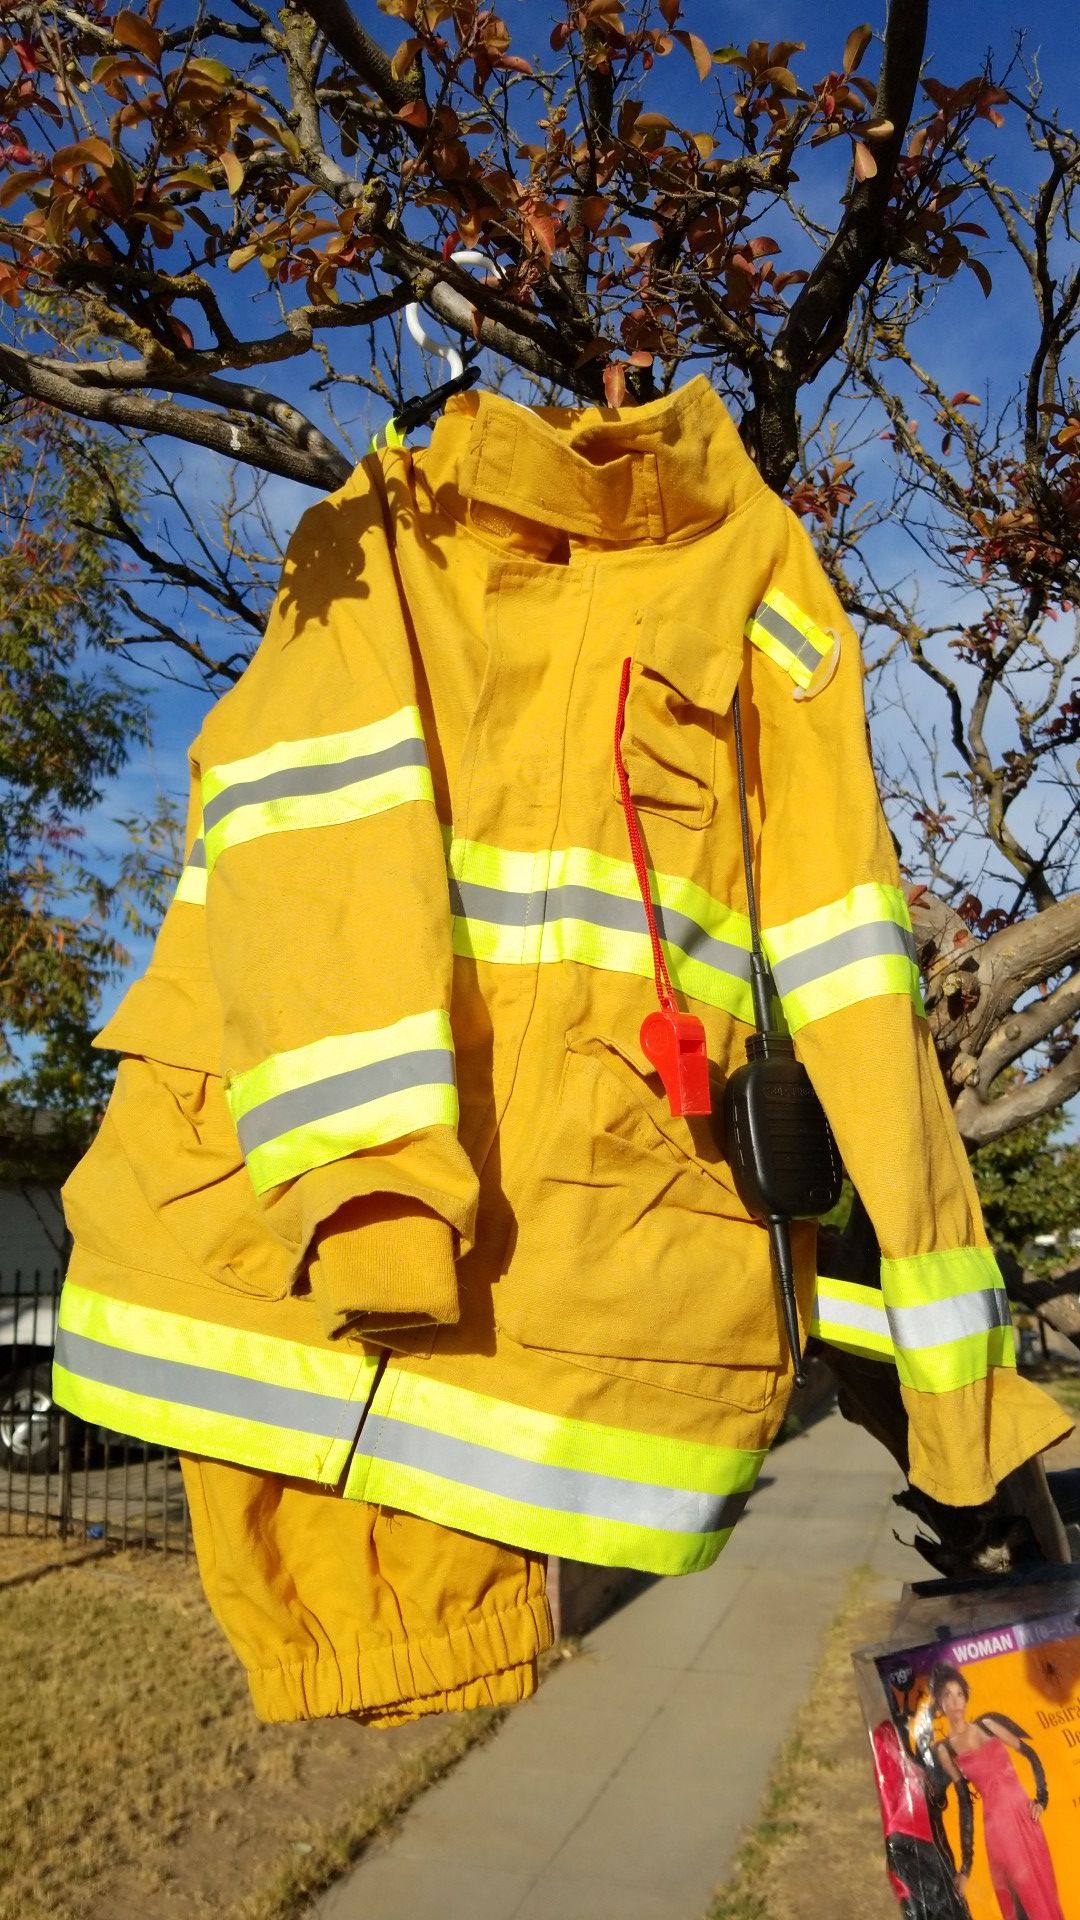 Fire fighter costume